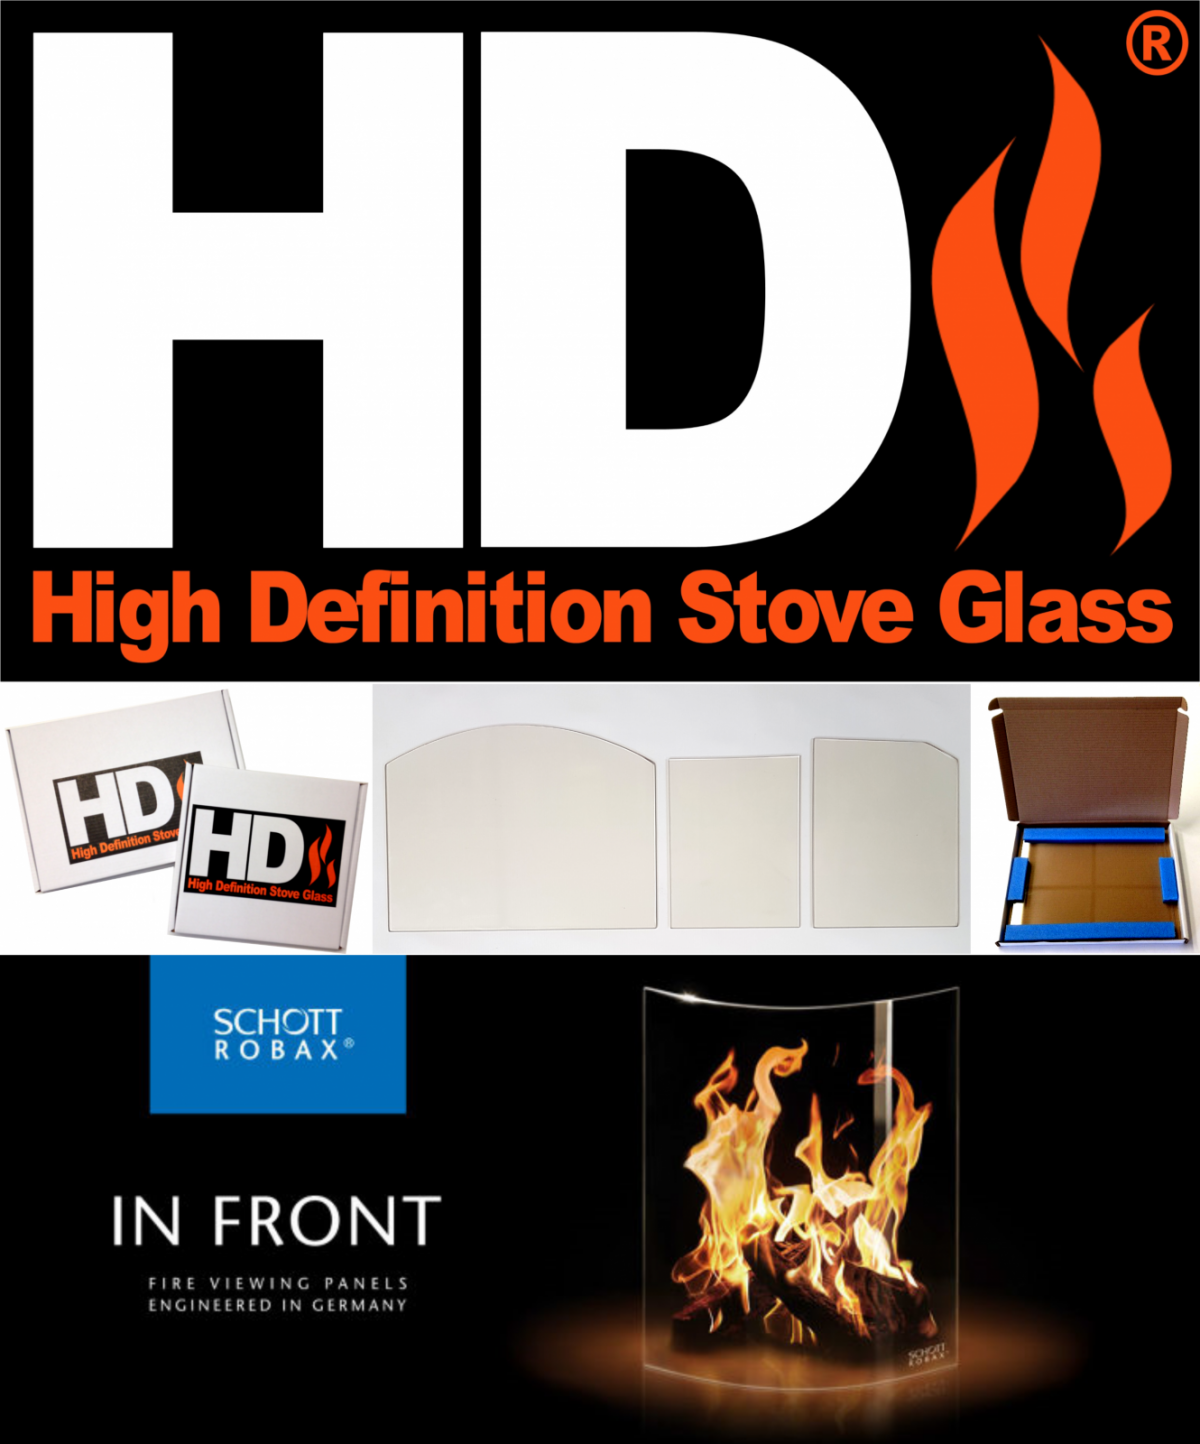 High Definition Stove Glass for the Gallery/Evergreen Firefox 8